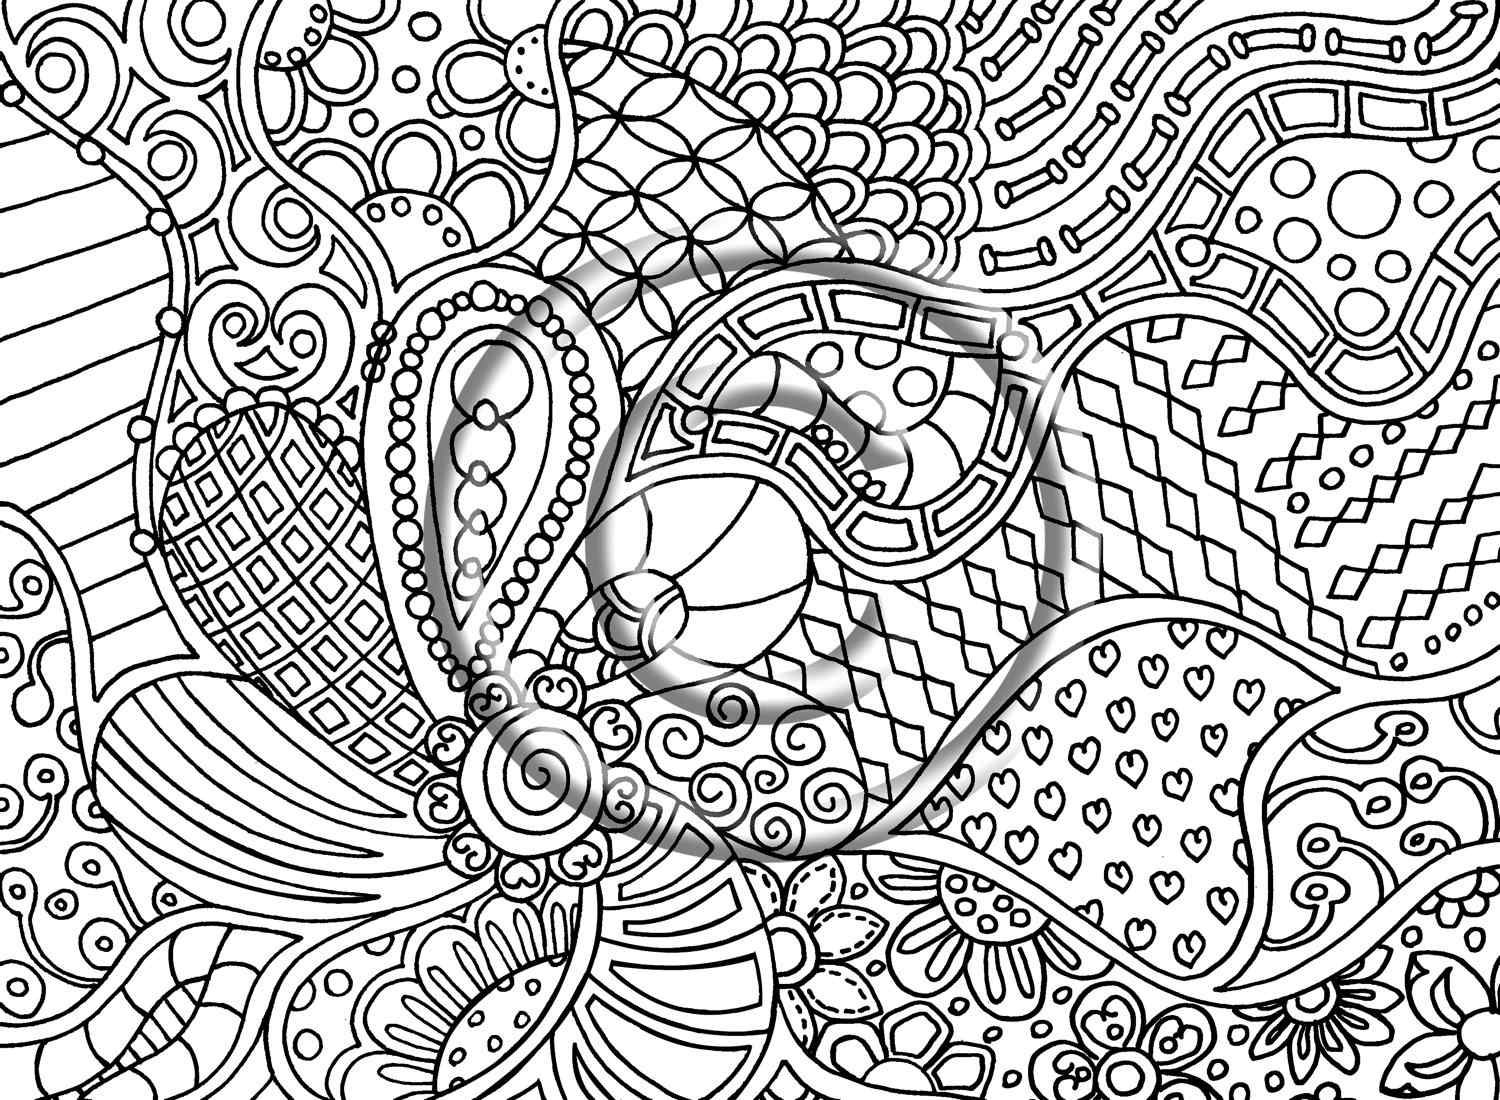 Psychedelic For Children Coloring Page